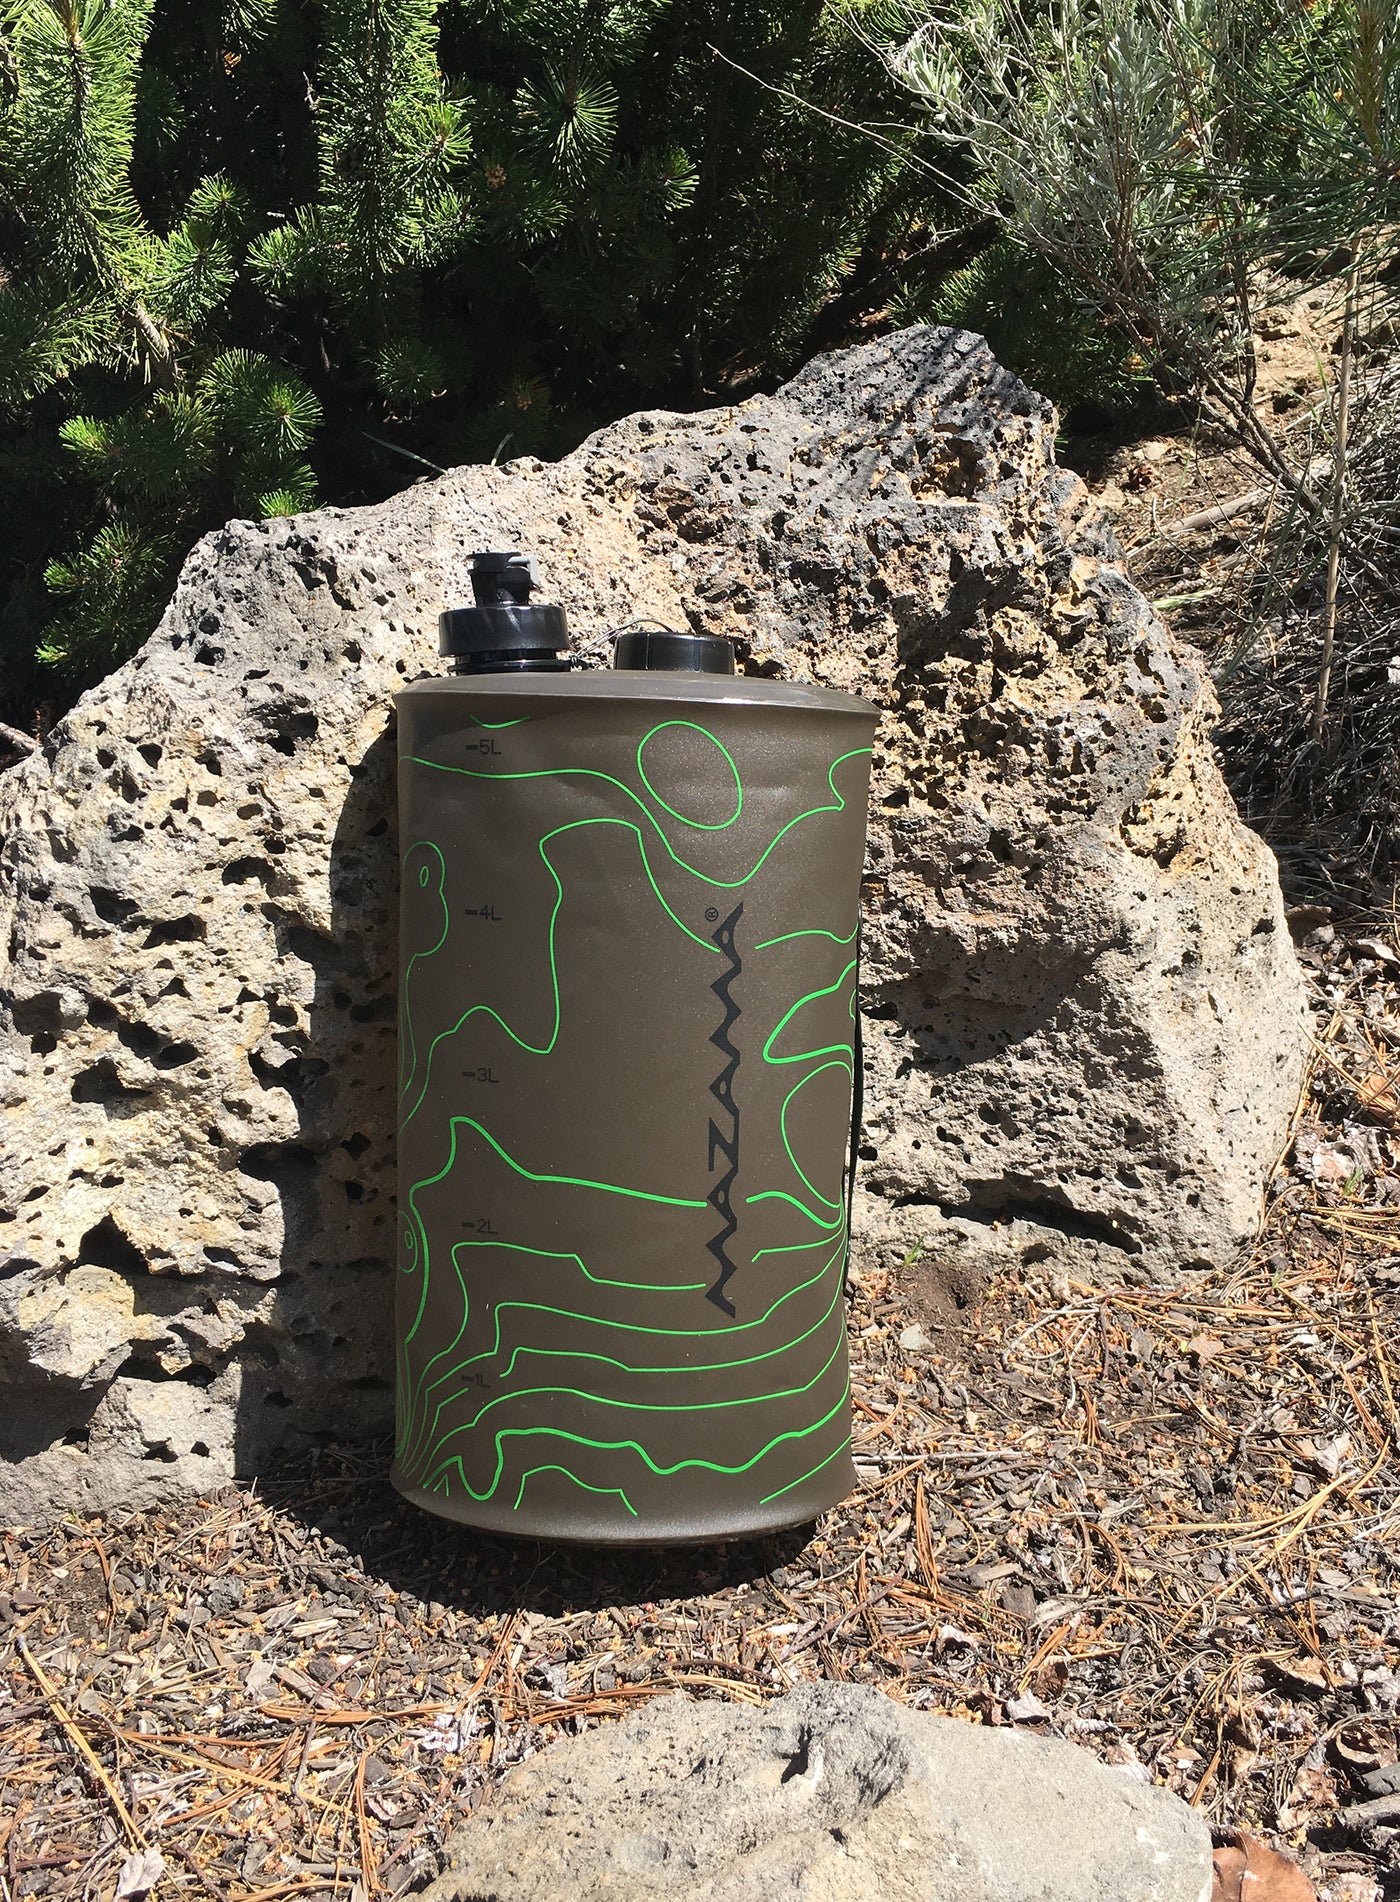 AMORA Collapsible Water Containers